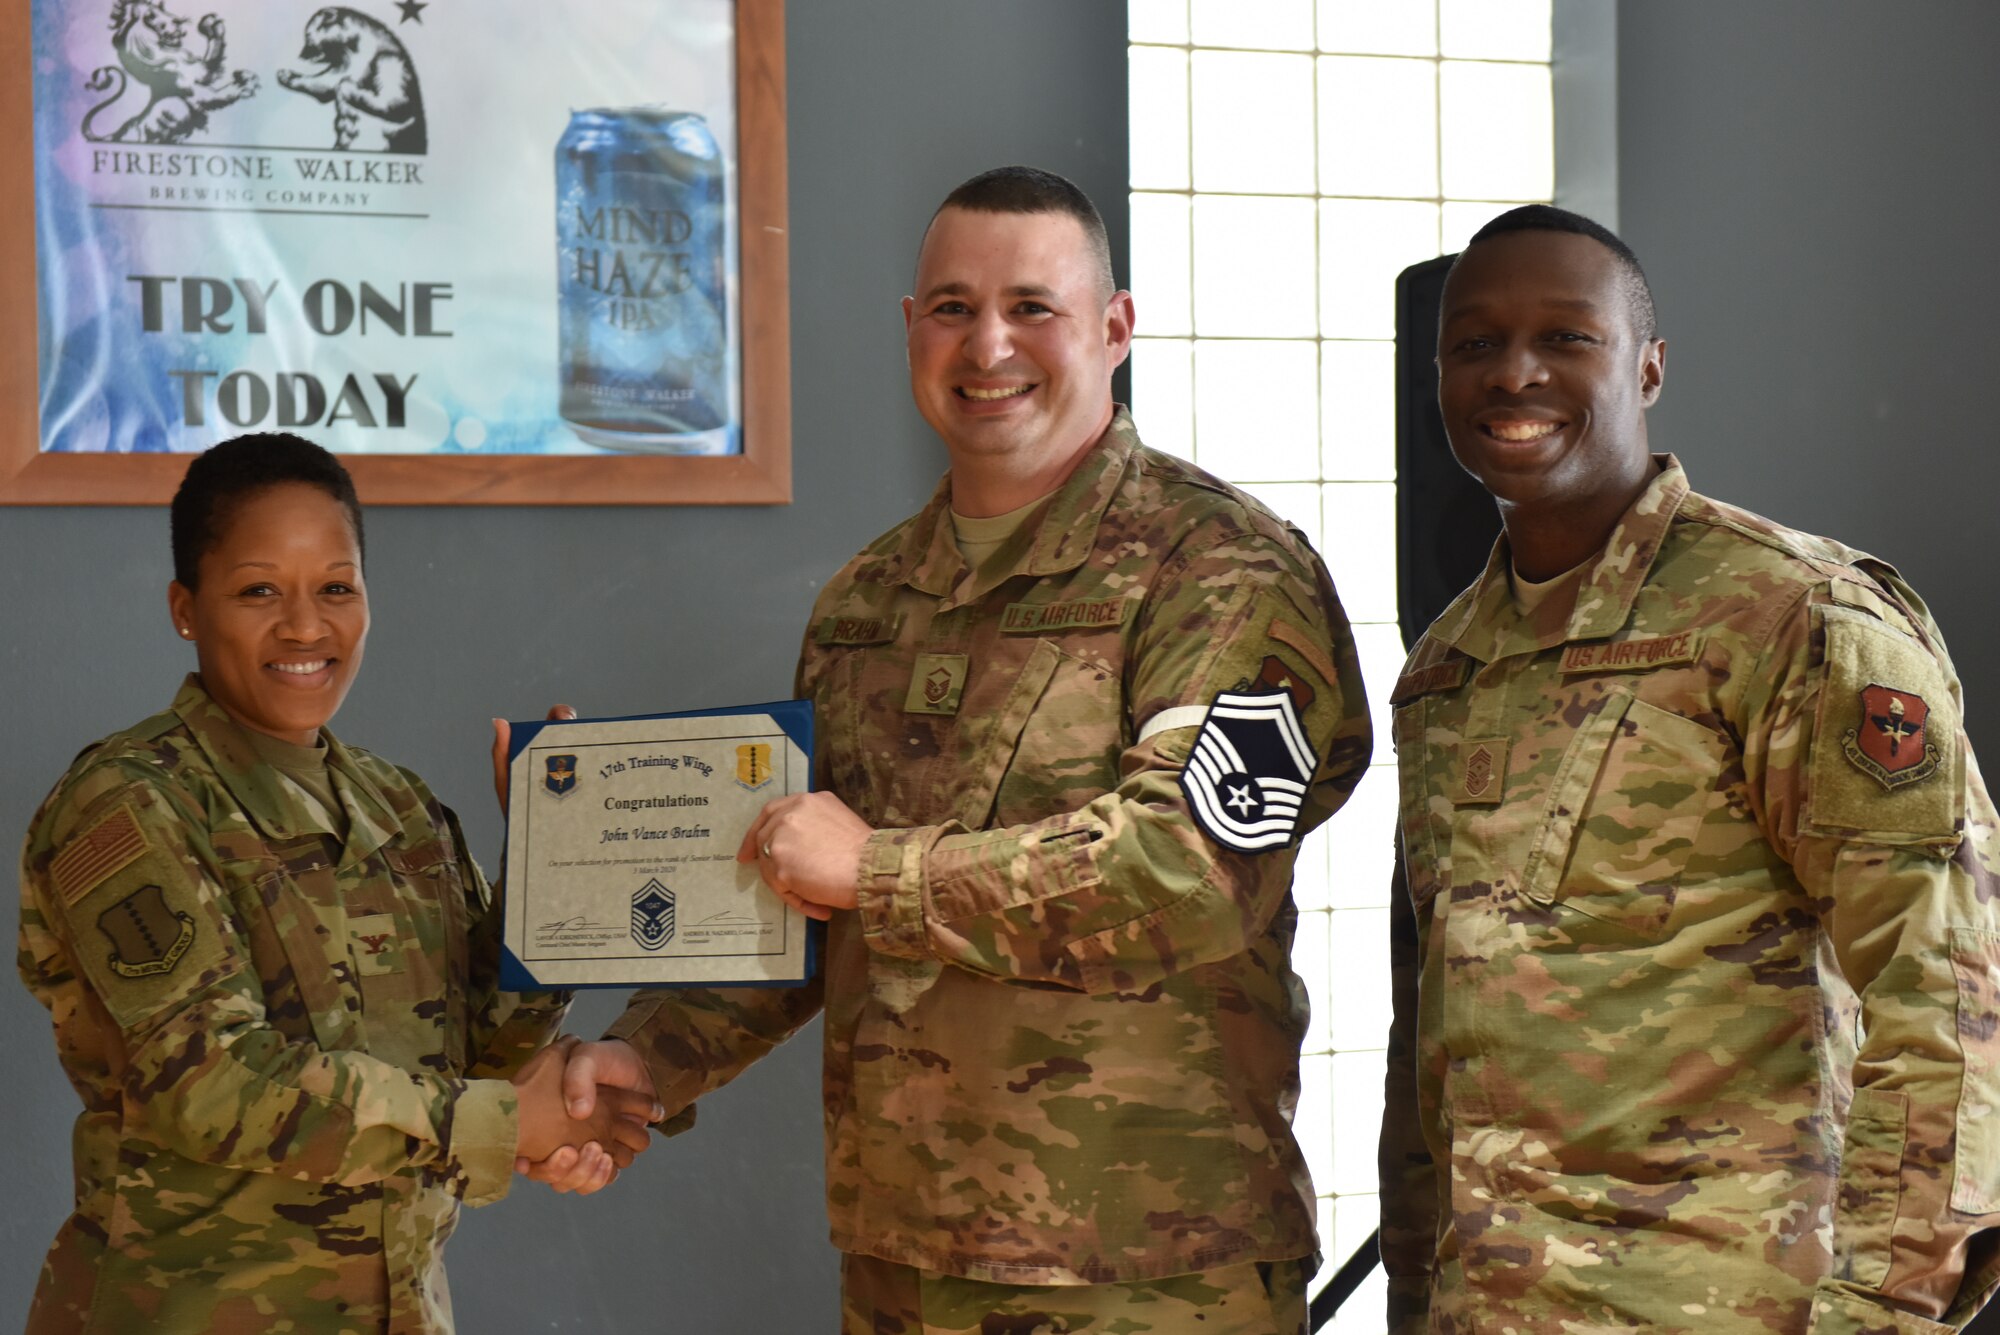 U.S. Air Force Col. Lauren Bryd, 17th Medical Group commander, presents Senior Master Sgt. select John Brahm, 17th Communications Squadron flight chief, with a certificate indicating his line number during the senior master sgt. release party at the event center on Goofellow Air Force Base, Texas, March 3, 2020. A line number indicates when the individual will officially promote to the rank that they have earned. (U.S. Air Force photo by Senior Airman Seraiah Wolf)